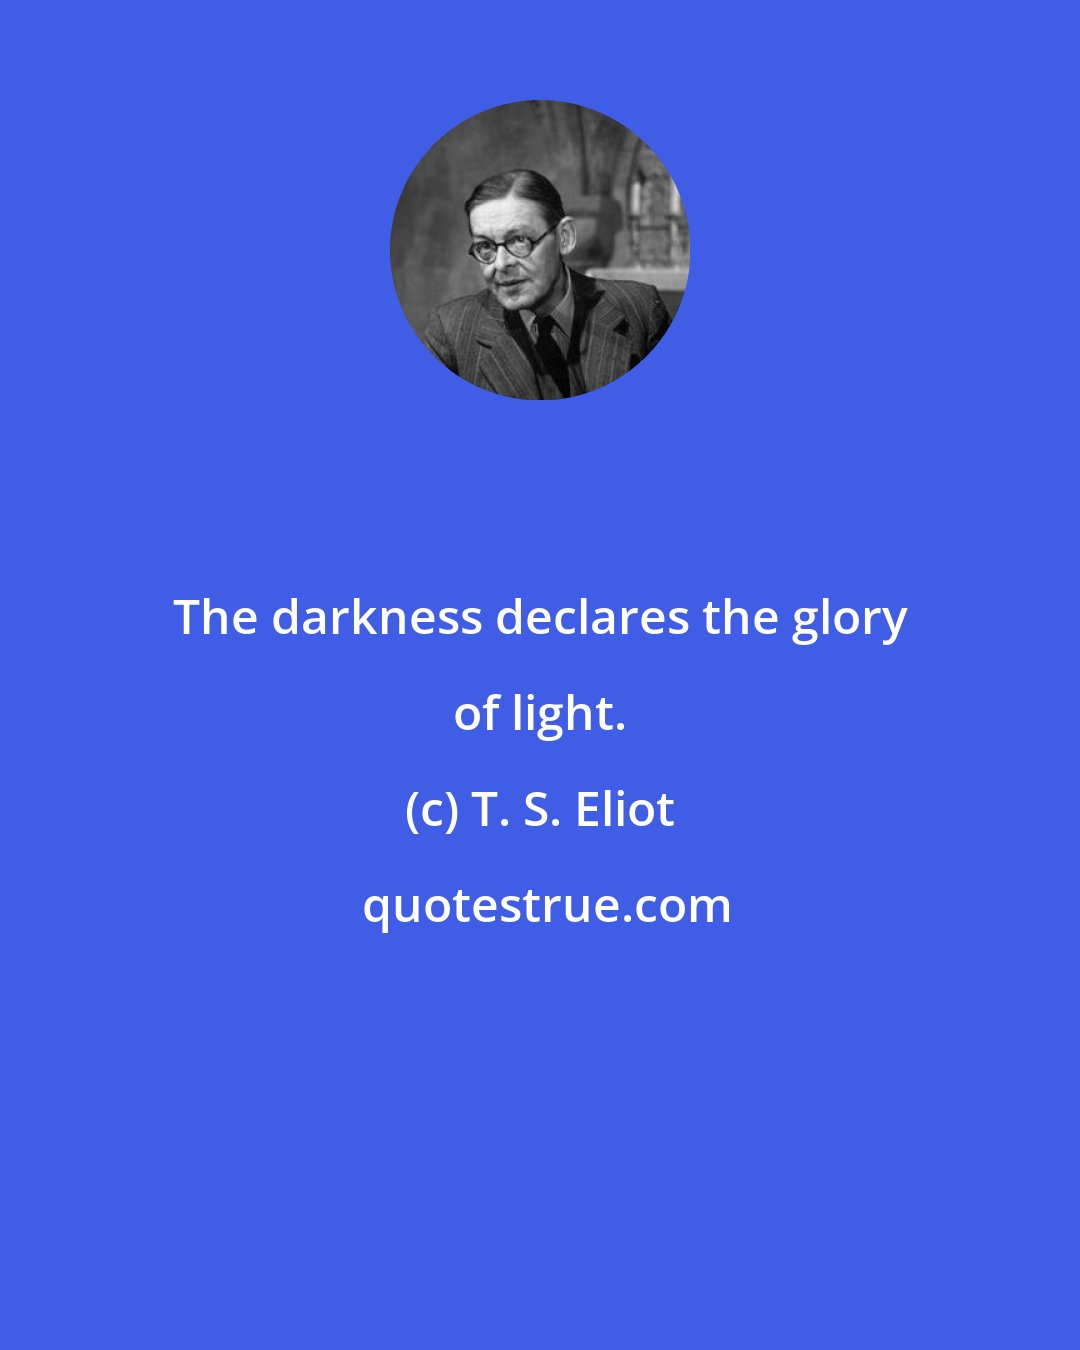 T. S. Eliot: The darkness declares the glory of light.